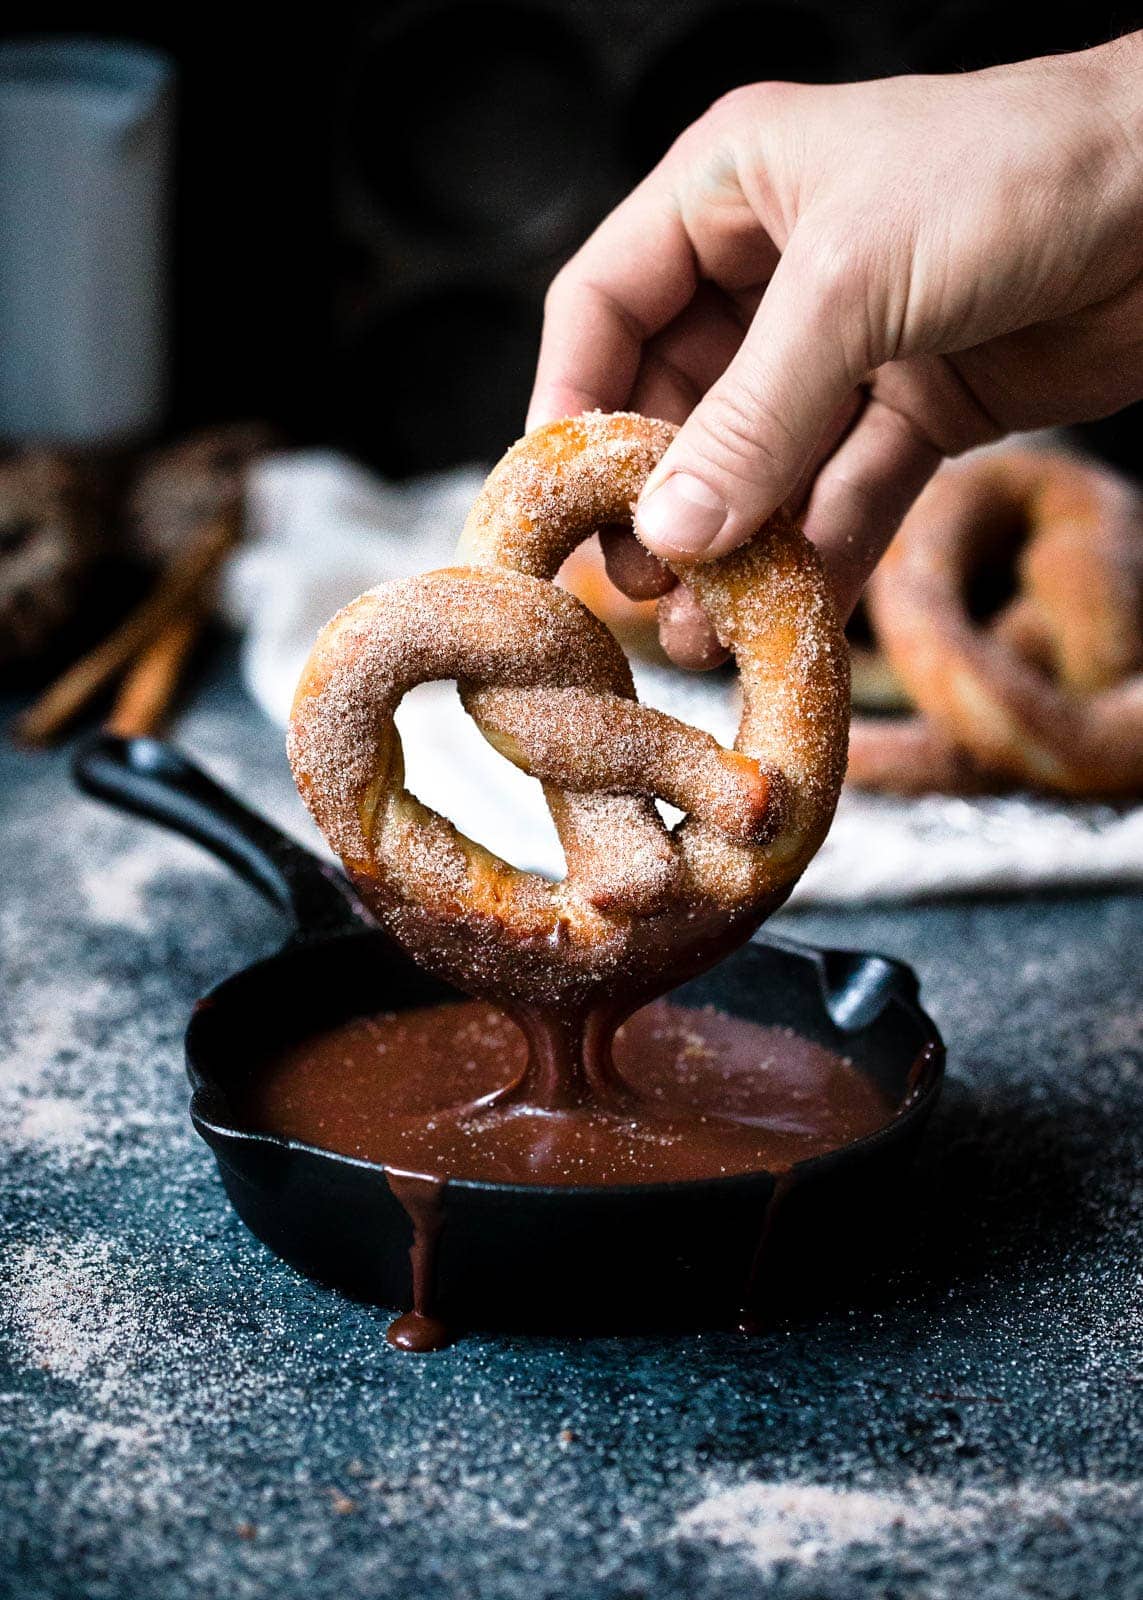 Even better than store-bought pretzels, these giant fluffy Cinnamon Sugar Pretzels with a sinful hot fudge dipping sauce make carb-o-loading so worth it.